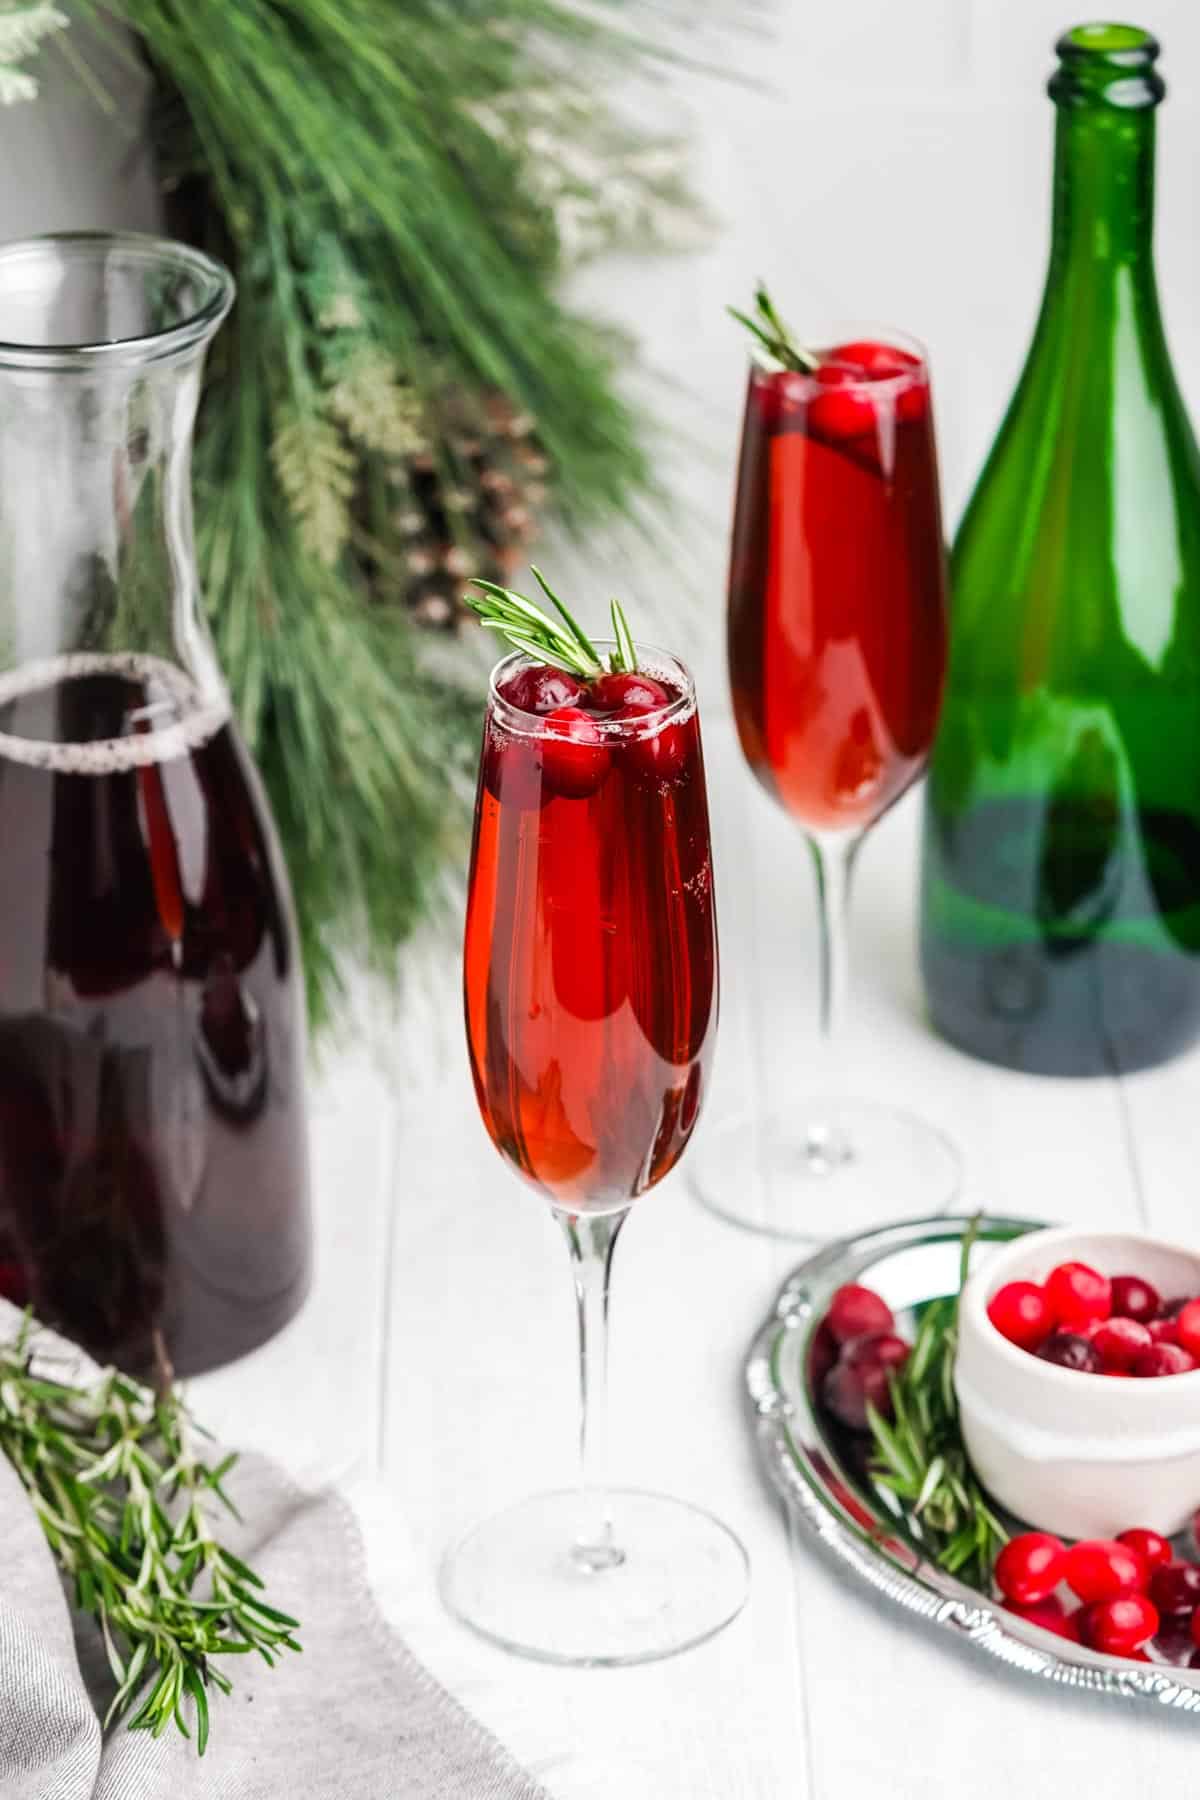 Glasses filled with cranberry juice and champagne in glasses with champagne bottle, cranberry juice and fresh cranberries.